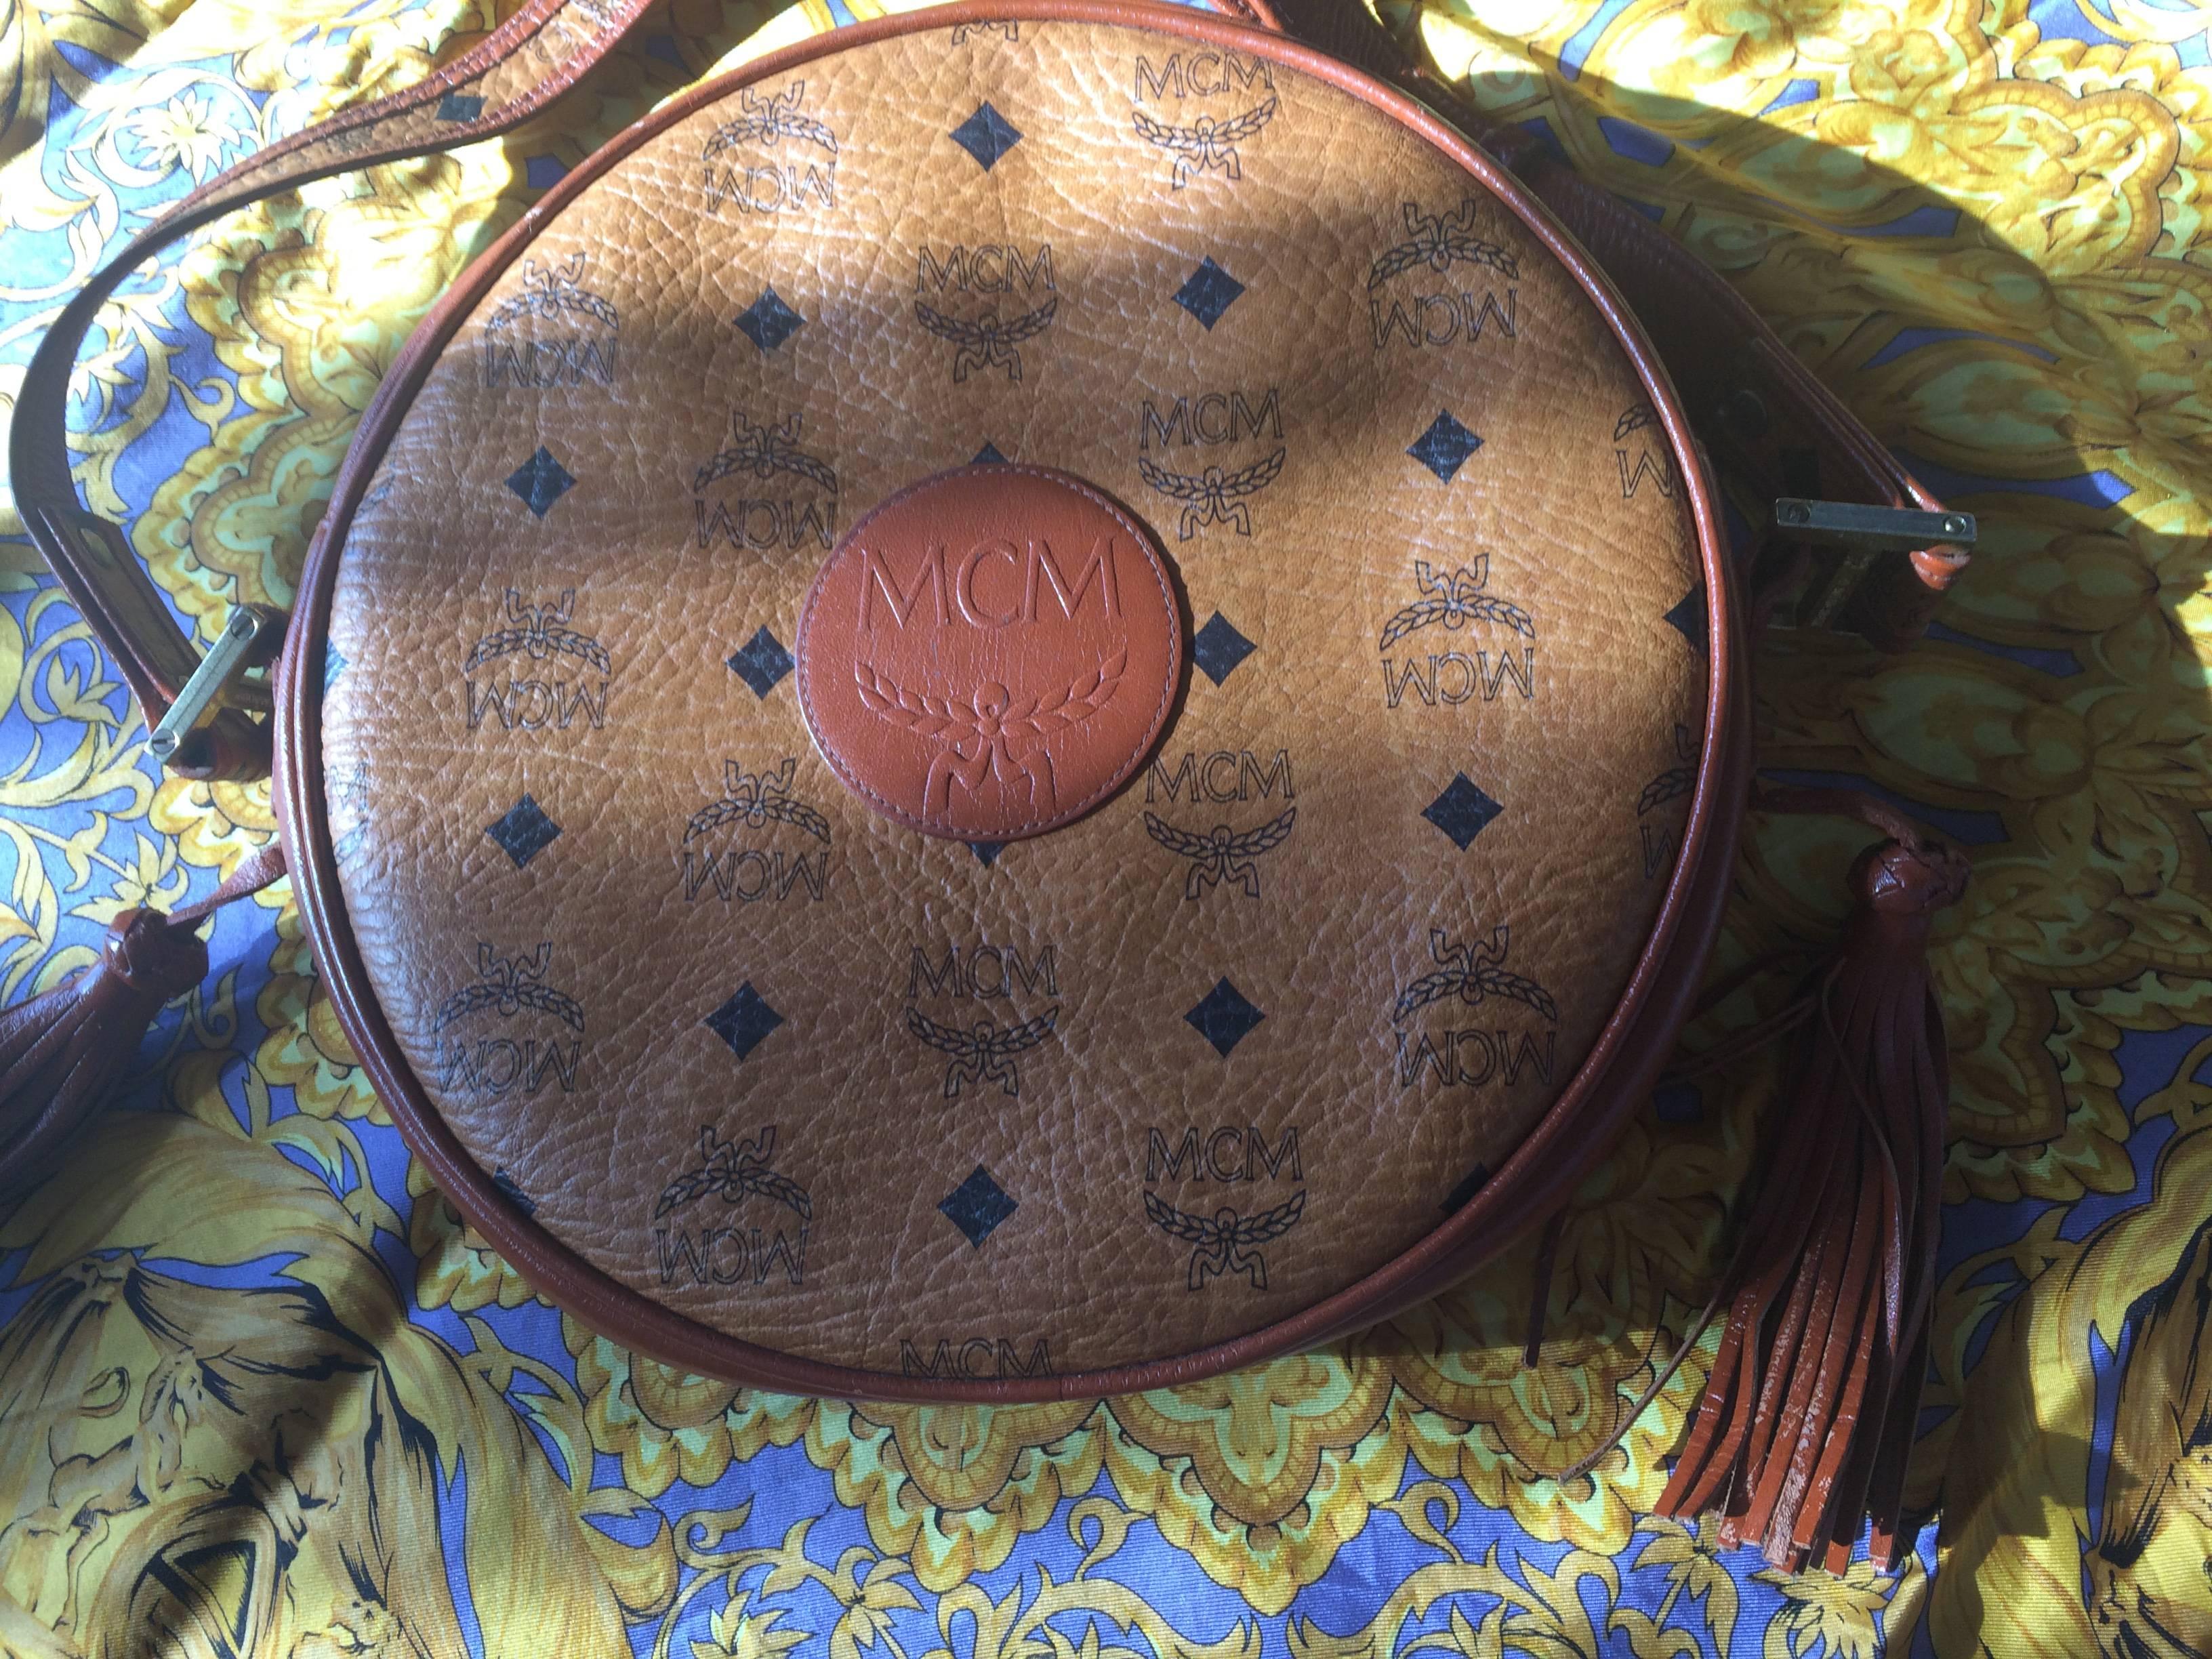 1990s. Vintage MCM rare brown monogram round shape shoulder bag with brown leather trimmings. Designed by Michael Cromer. Masterpiece. Unisex use.

MCM has been back in the fashion trend again!
Now it's considered to be one of the must-have